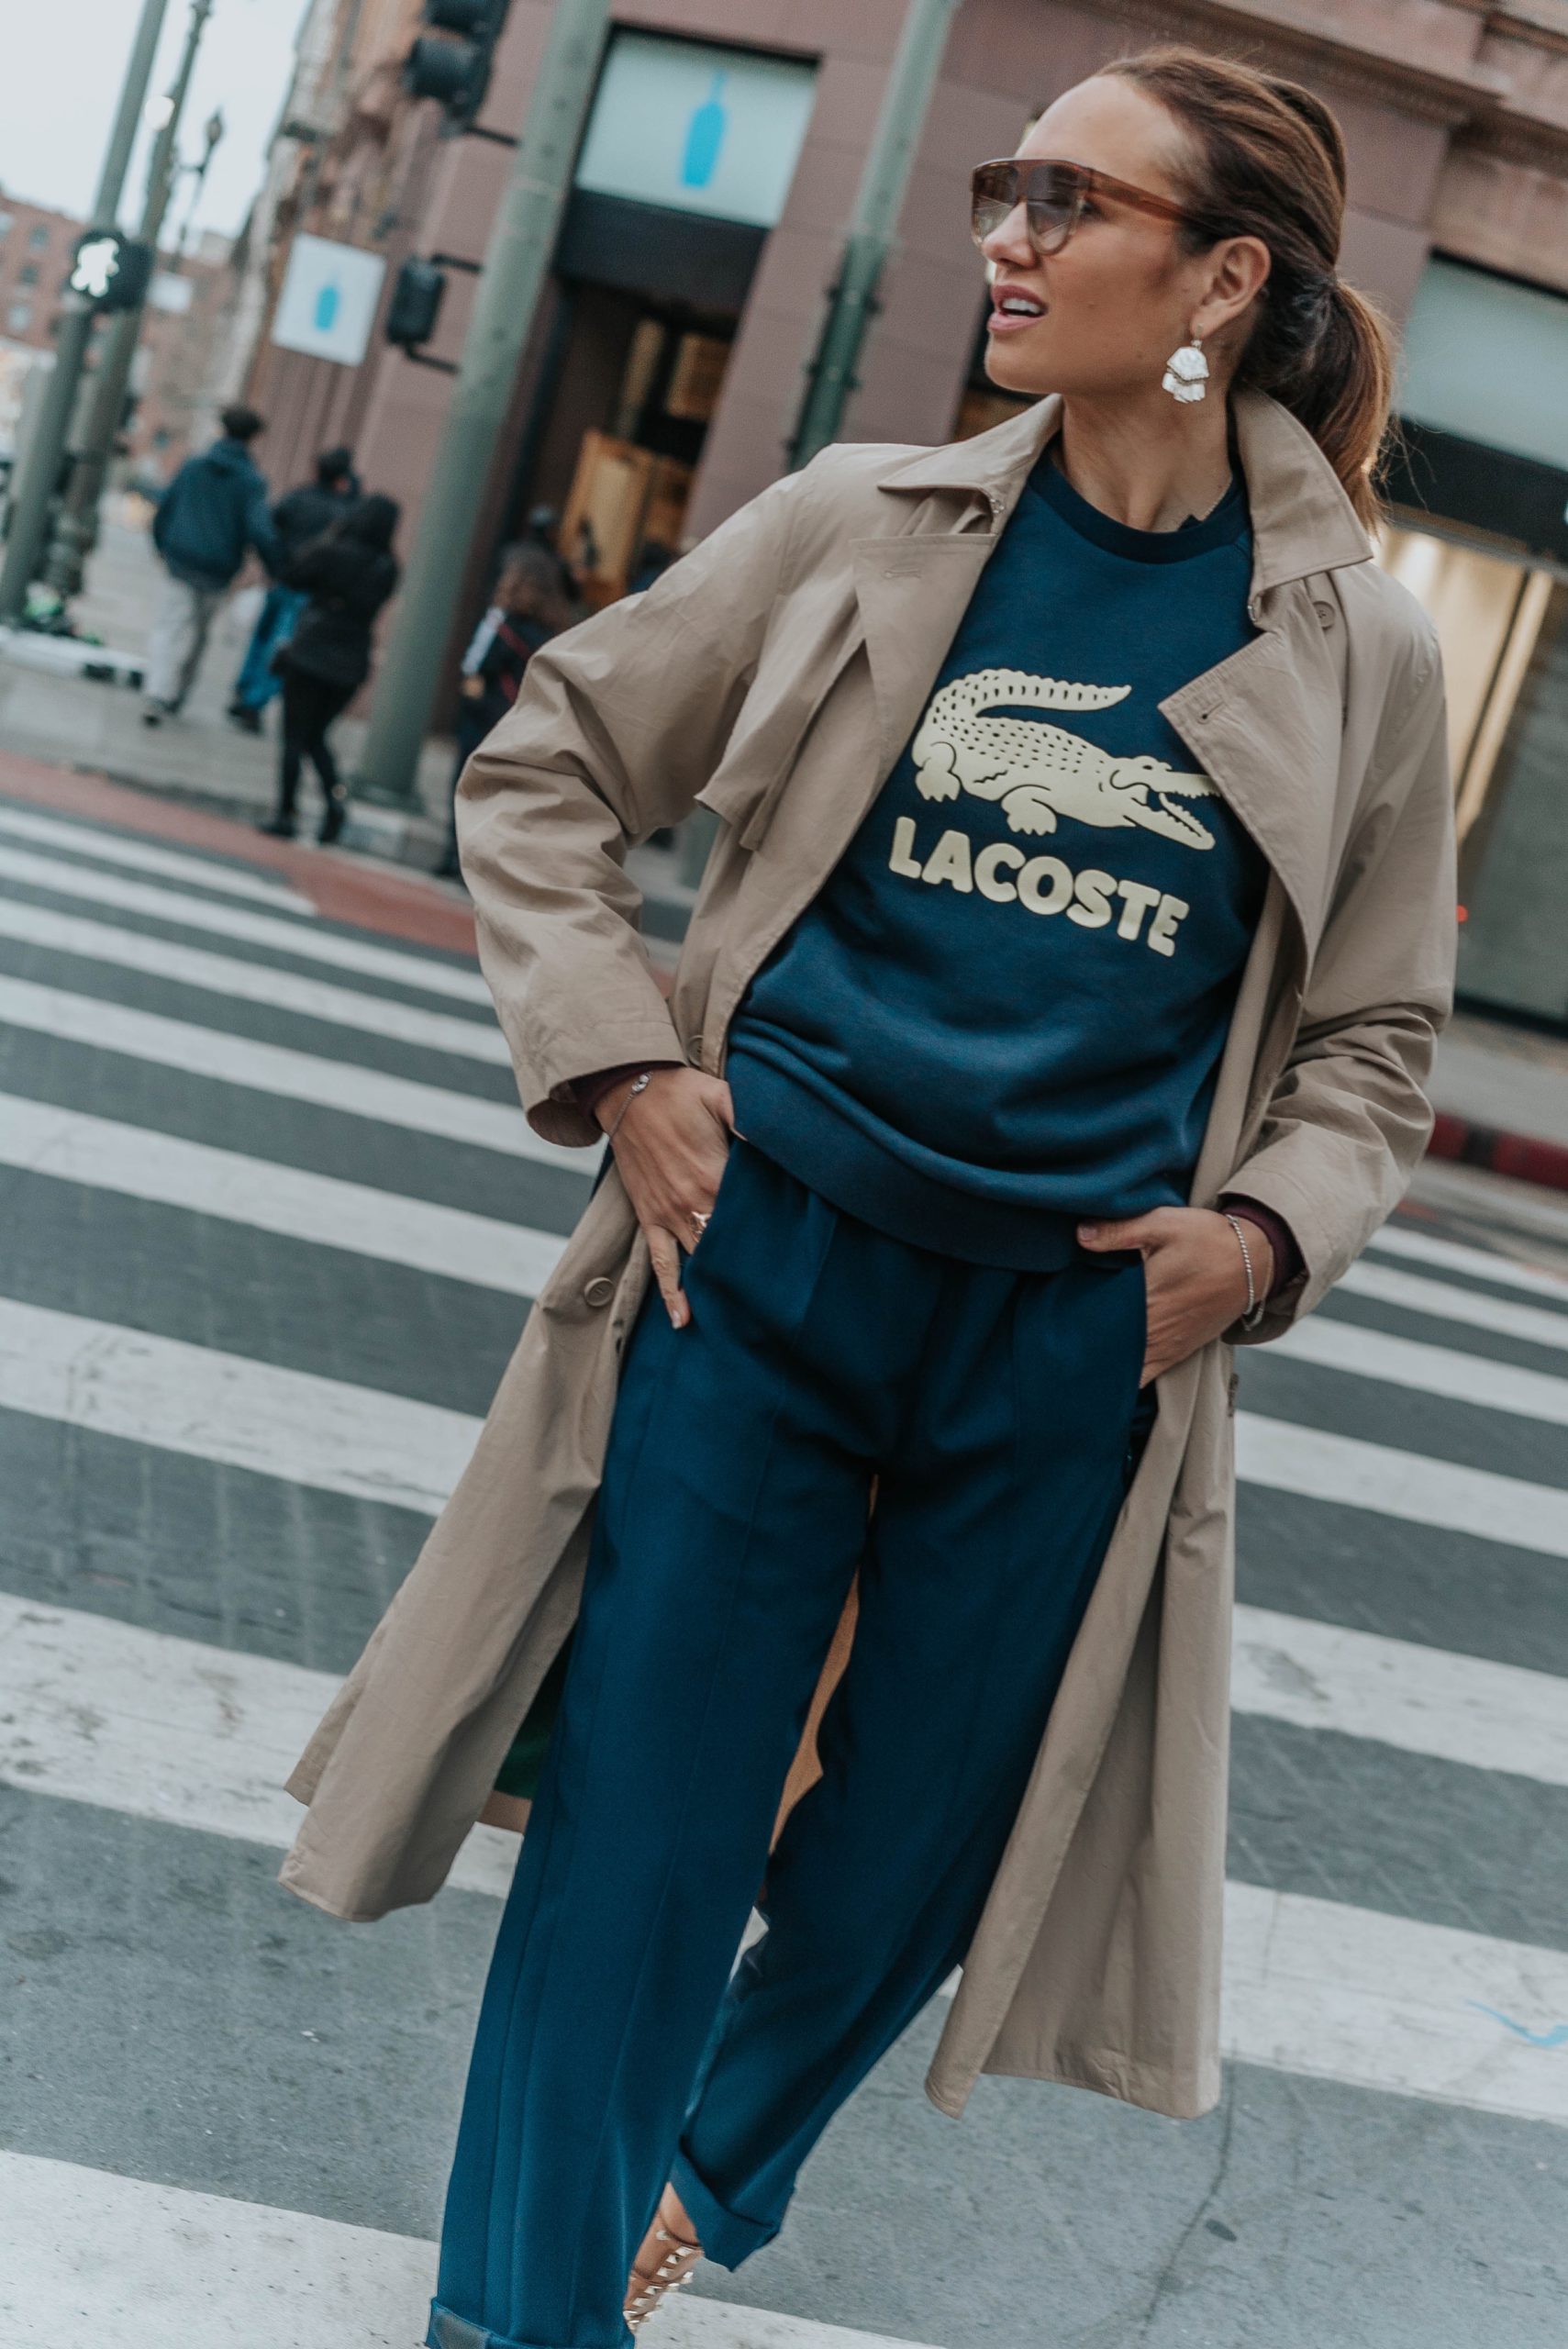 Lacoste Classics I'm wearing for Spring 